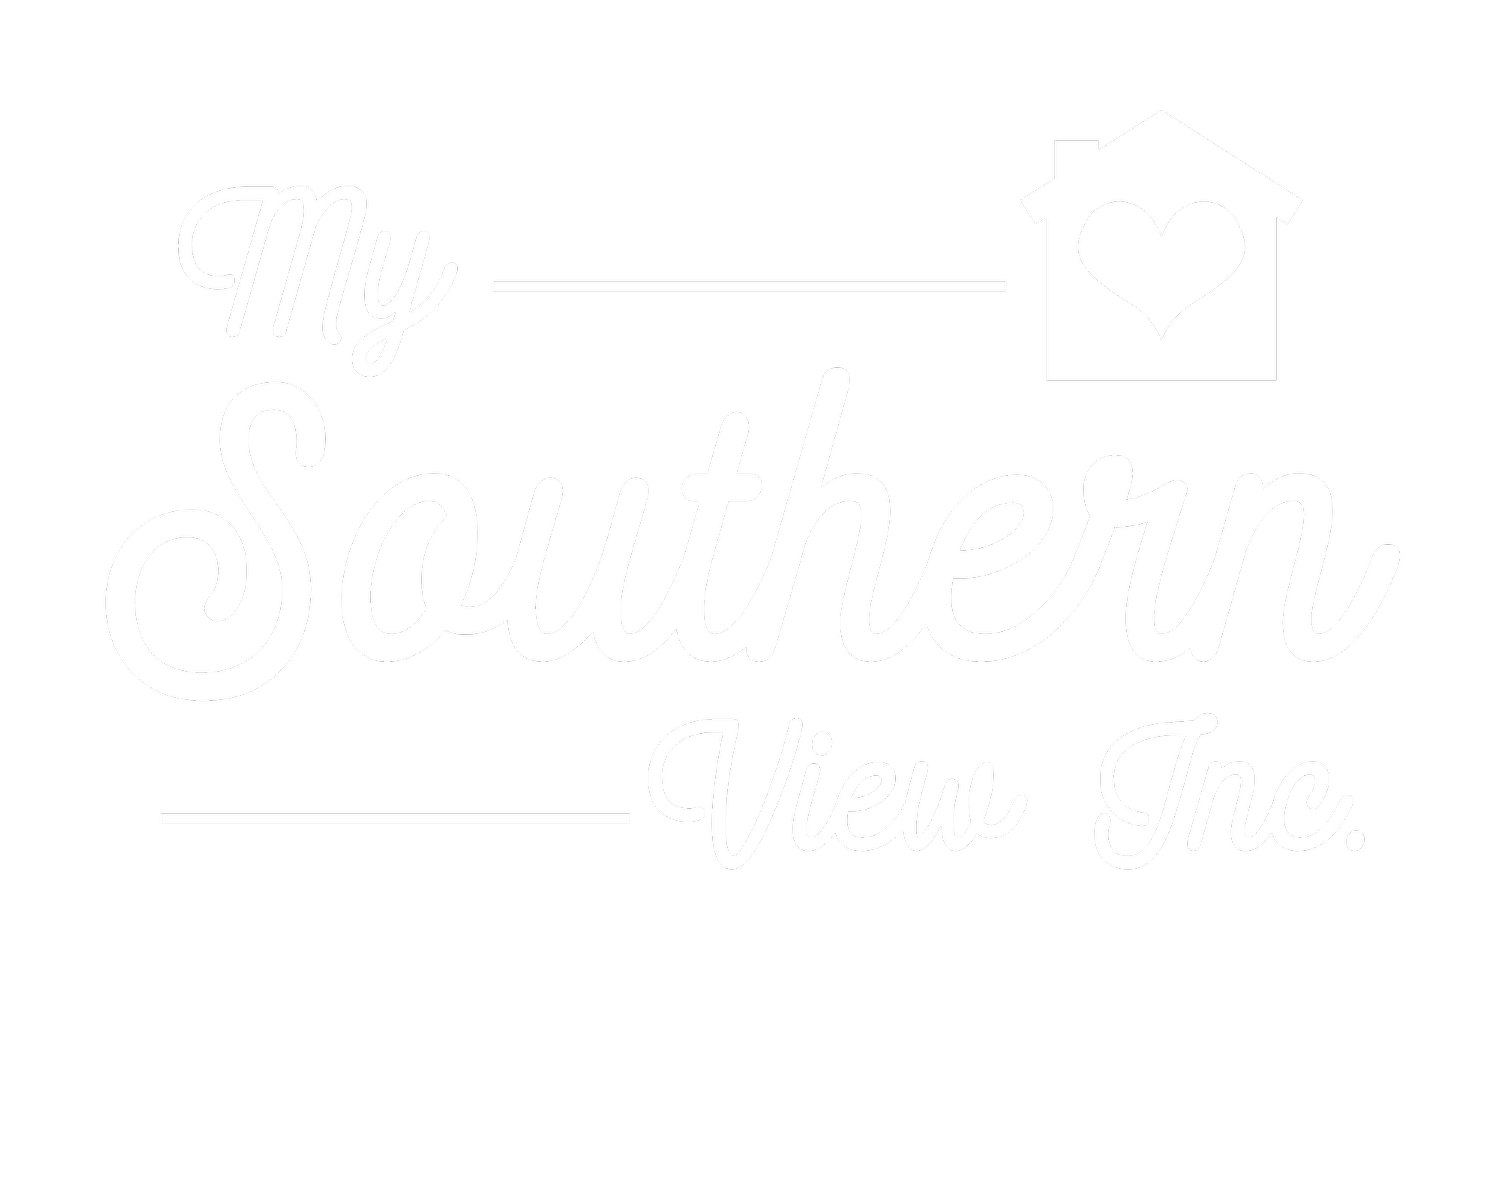 My Southern View, Inc.